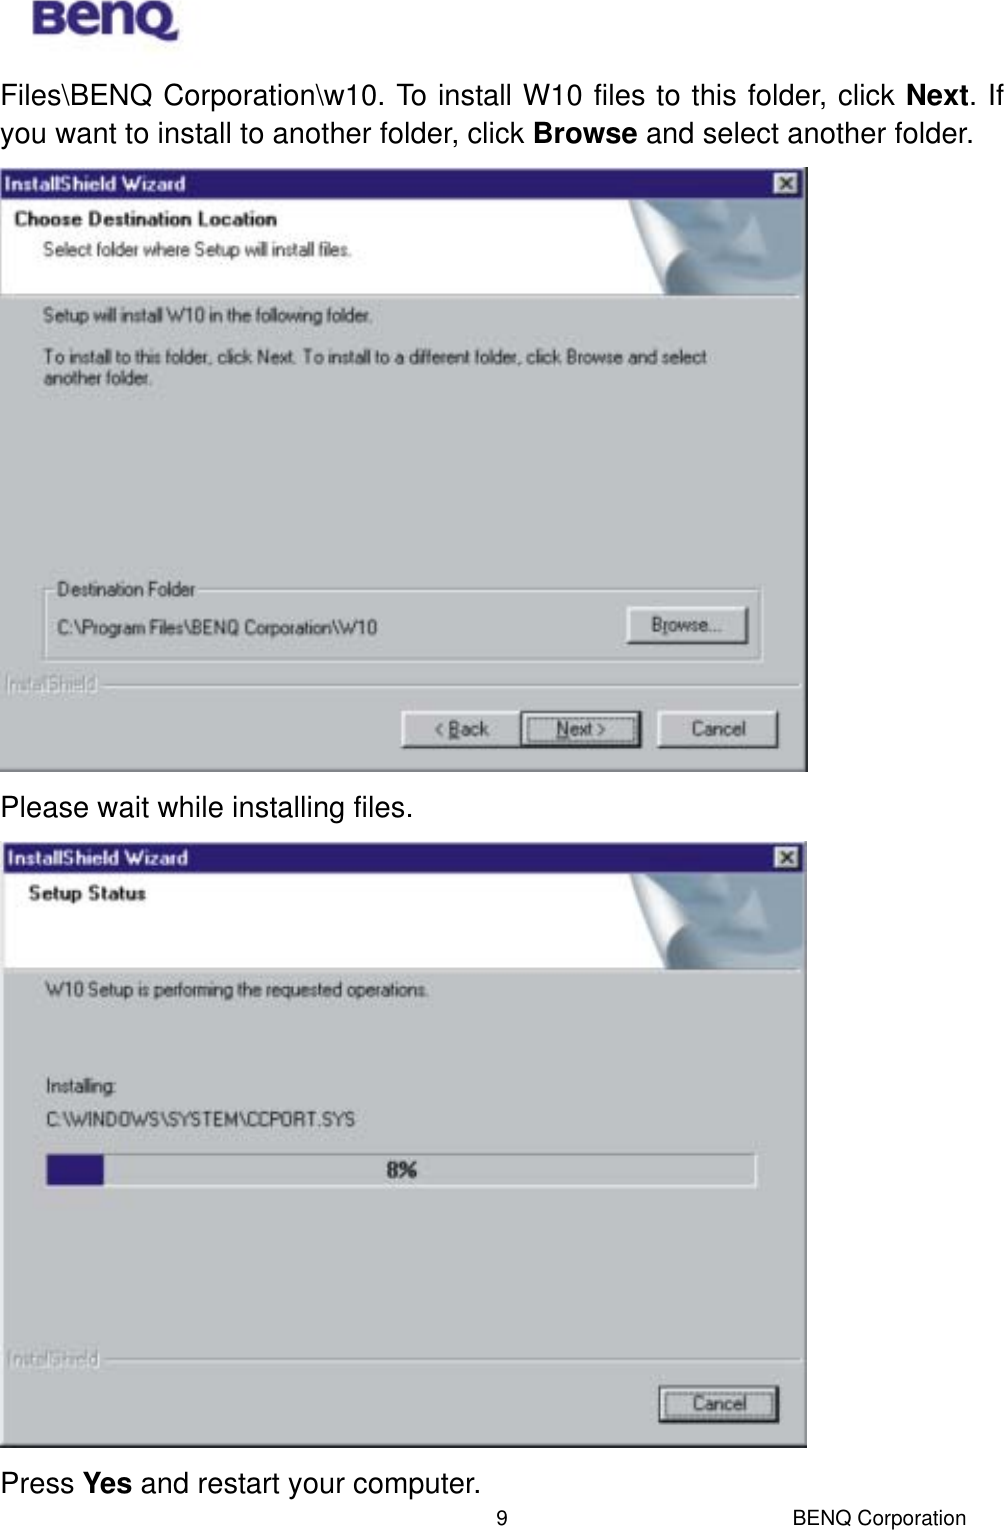  BENQ Corporation 9Files\BENQ Corporation\w10. To install W10 files to this folder, click Next. If you want to install to another folder, click Browse and select another folder.      Please wait while installing files.  Press Yes and restart your computer. 